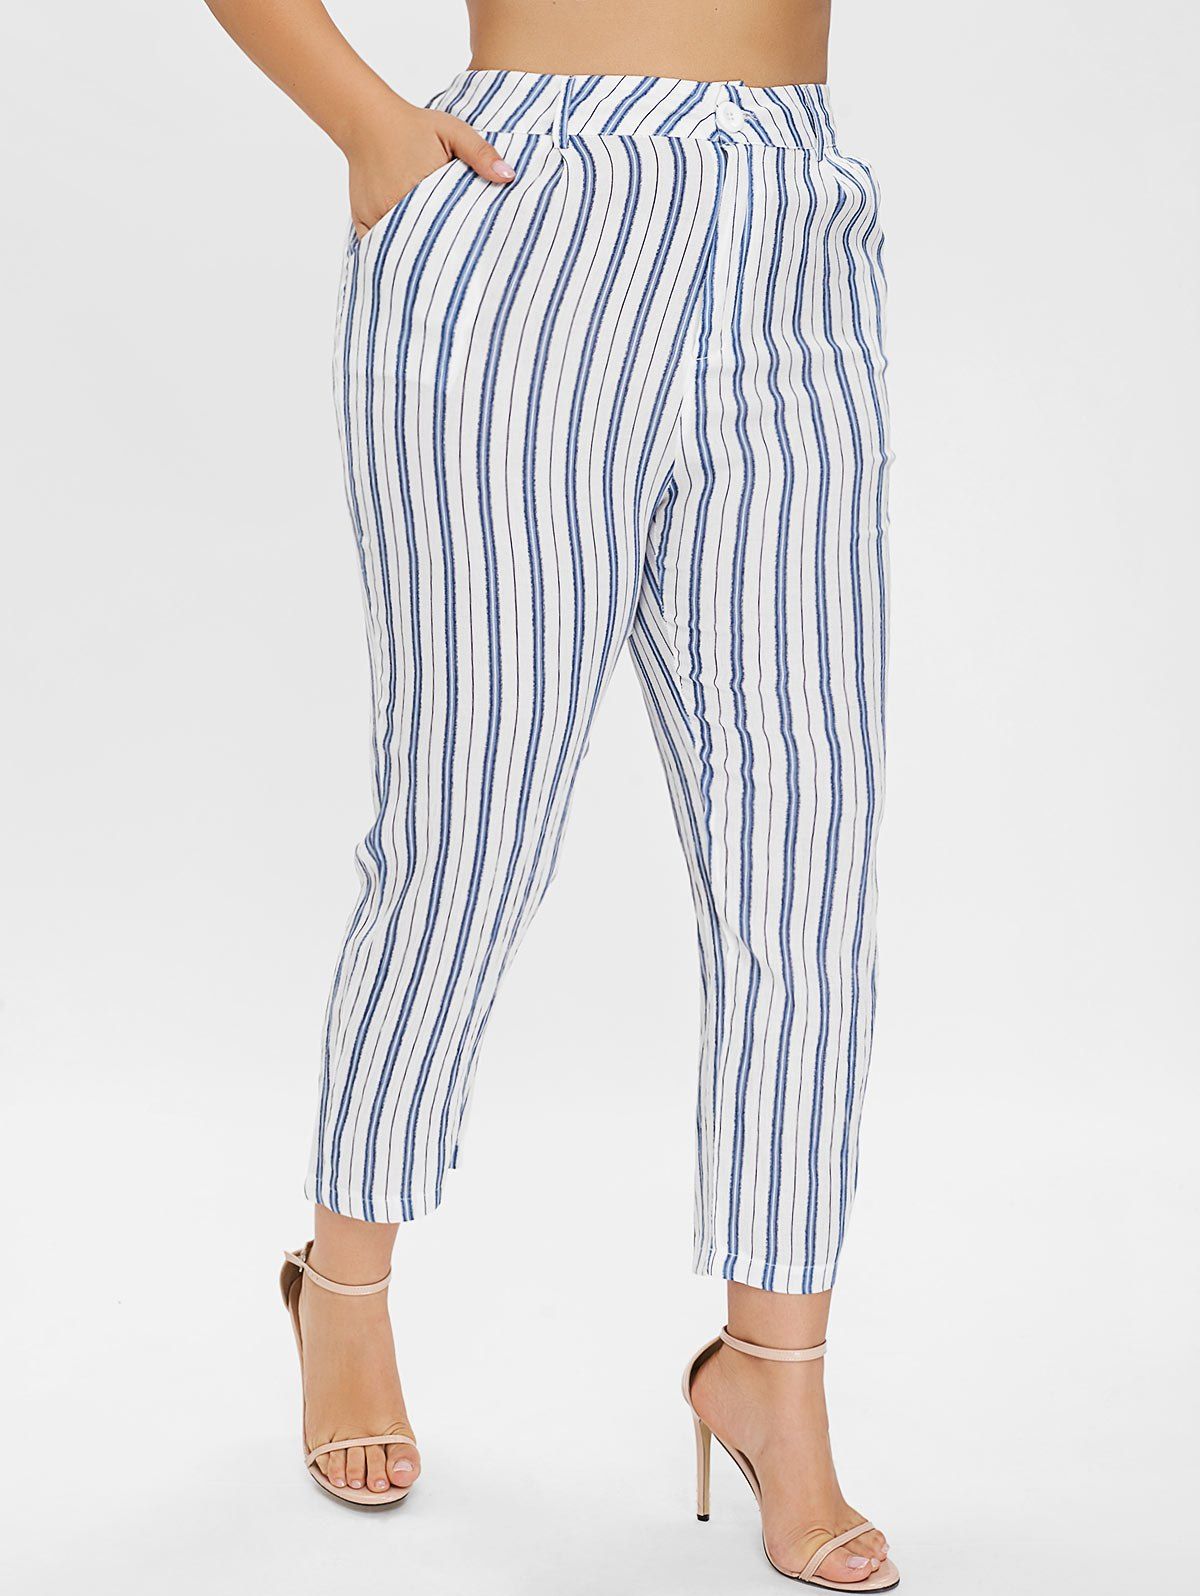 [17% OFF] 2021 Plus Size Button Detail Striped Pants In SEA BLUE ...